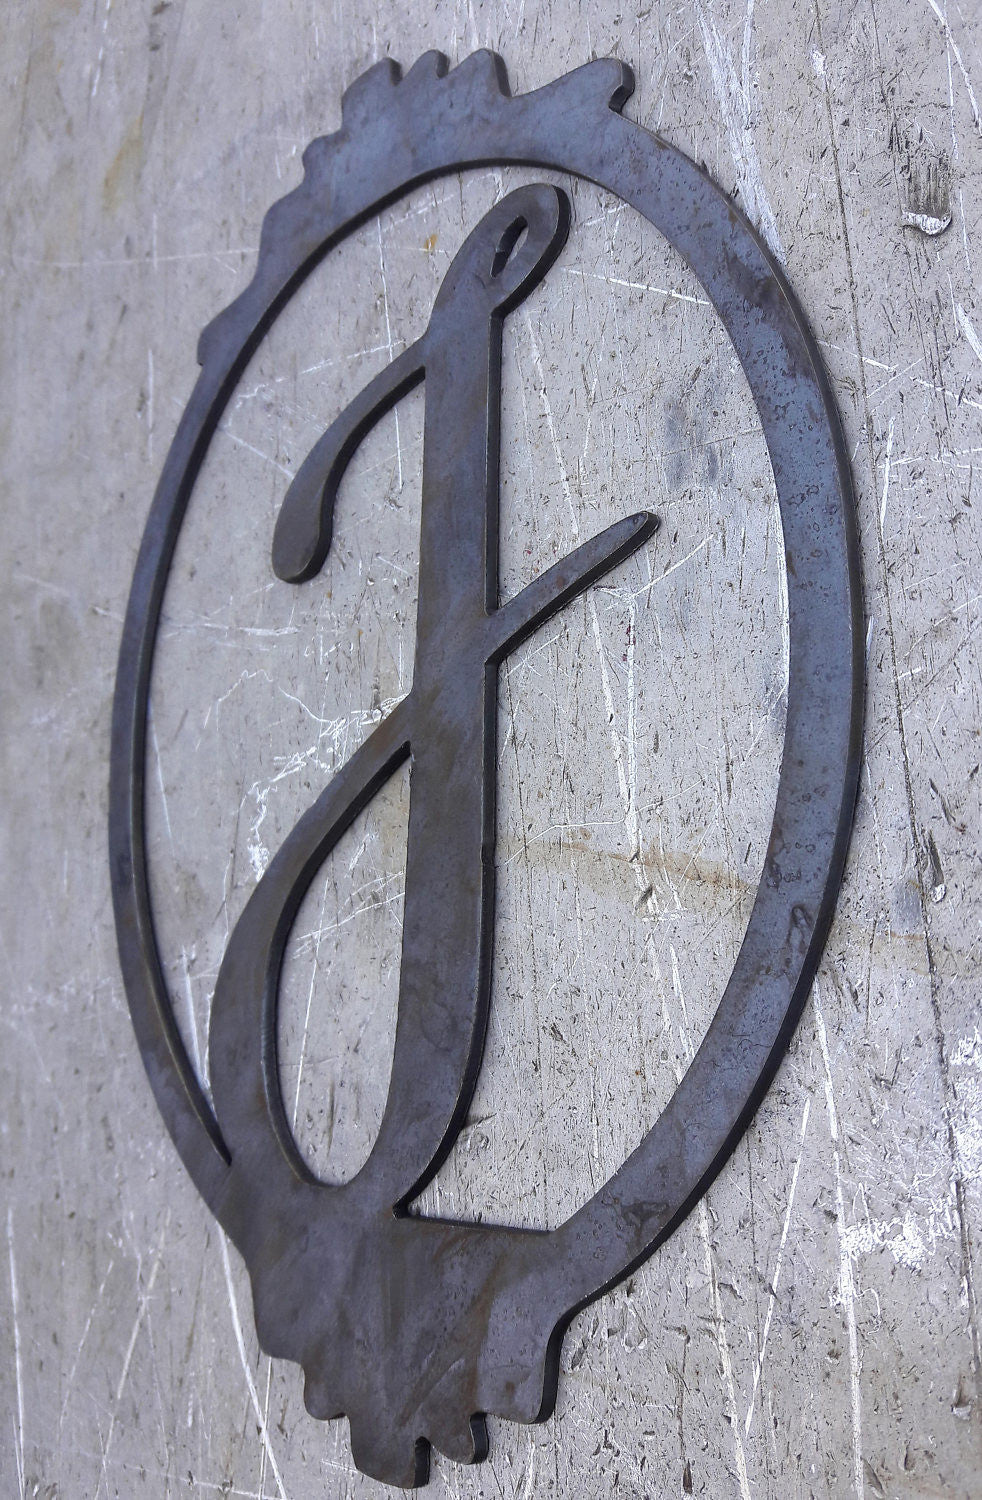 Personalized metal monogram with a border. The sign has a single letter and reads, "F".